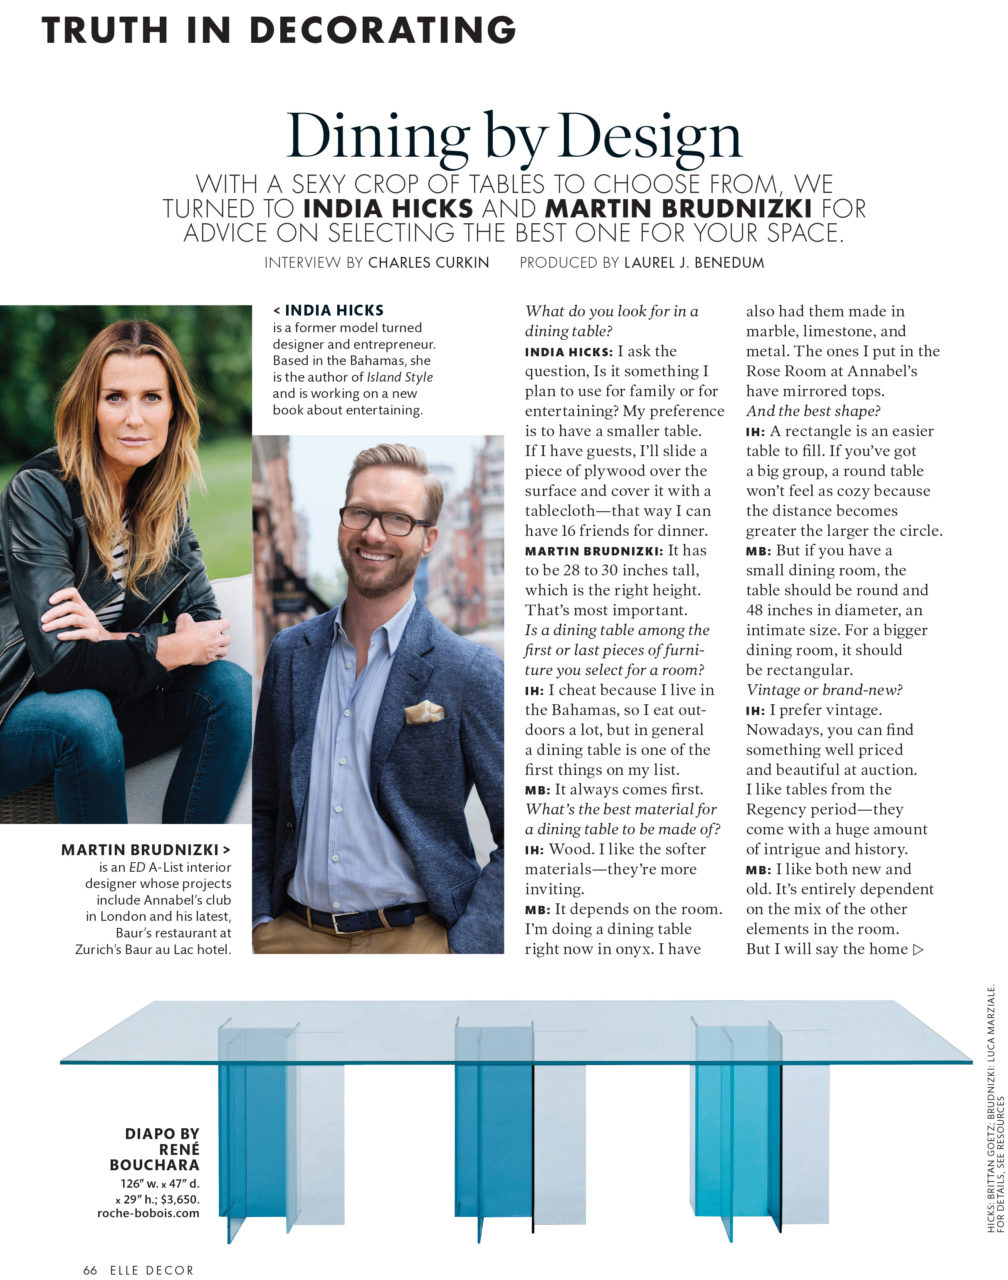 Elle Decor: Dining by Design, featuring Nakashima Double Holtz Dining Table